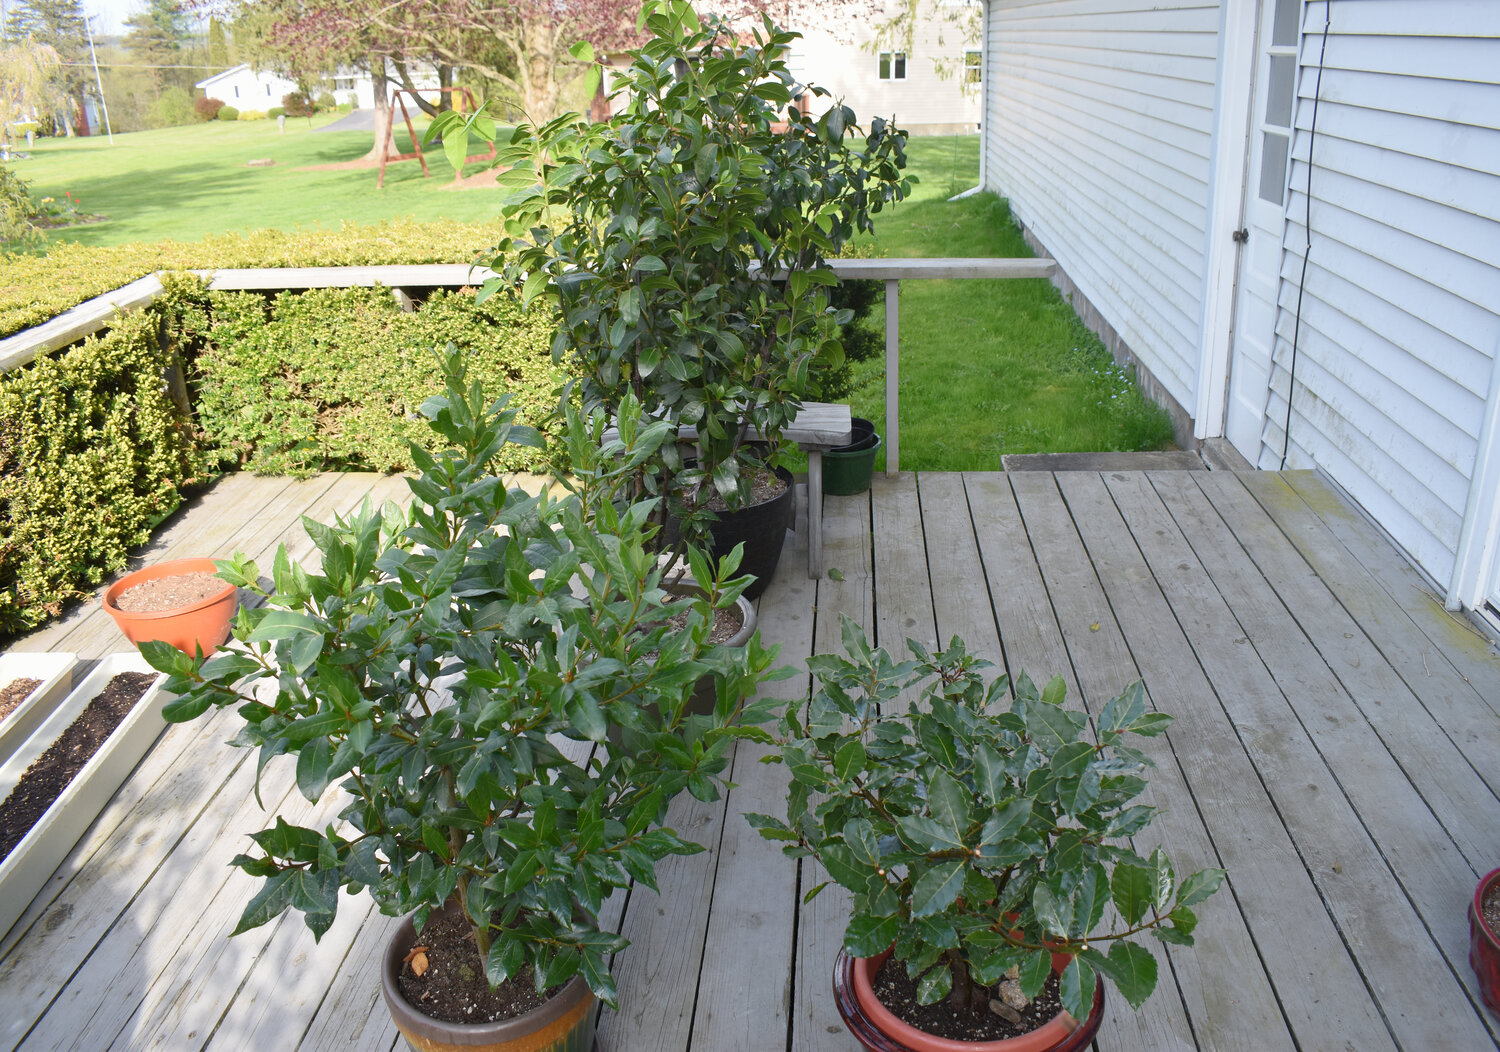 Bay plants are a tree, but grow well in pots -- just keep them trimmed to a manageable bush. Dollar for dollar, growing herbs is one of the best investments a cook can make in the kitchen.